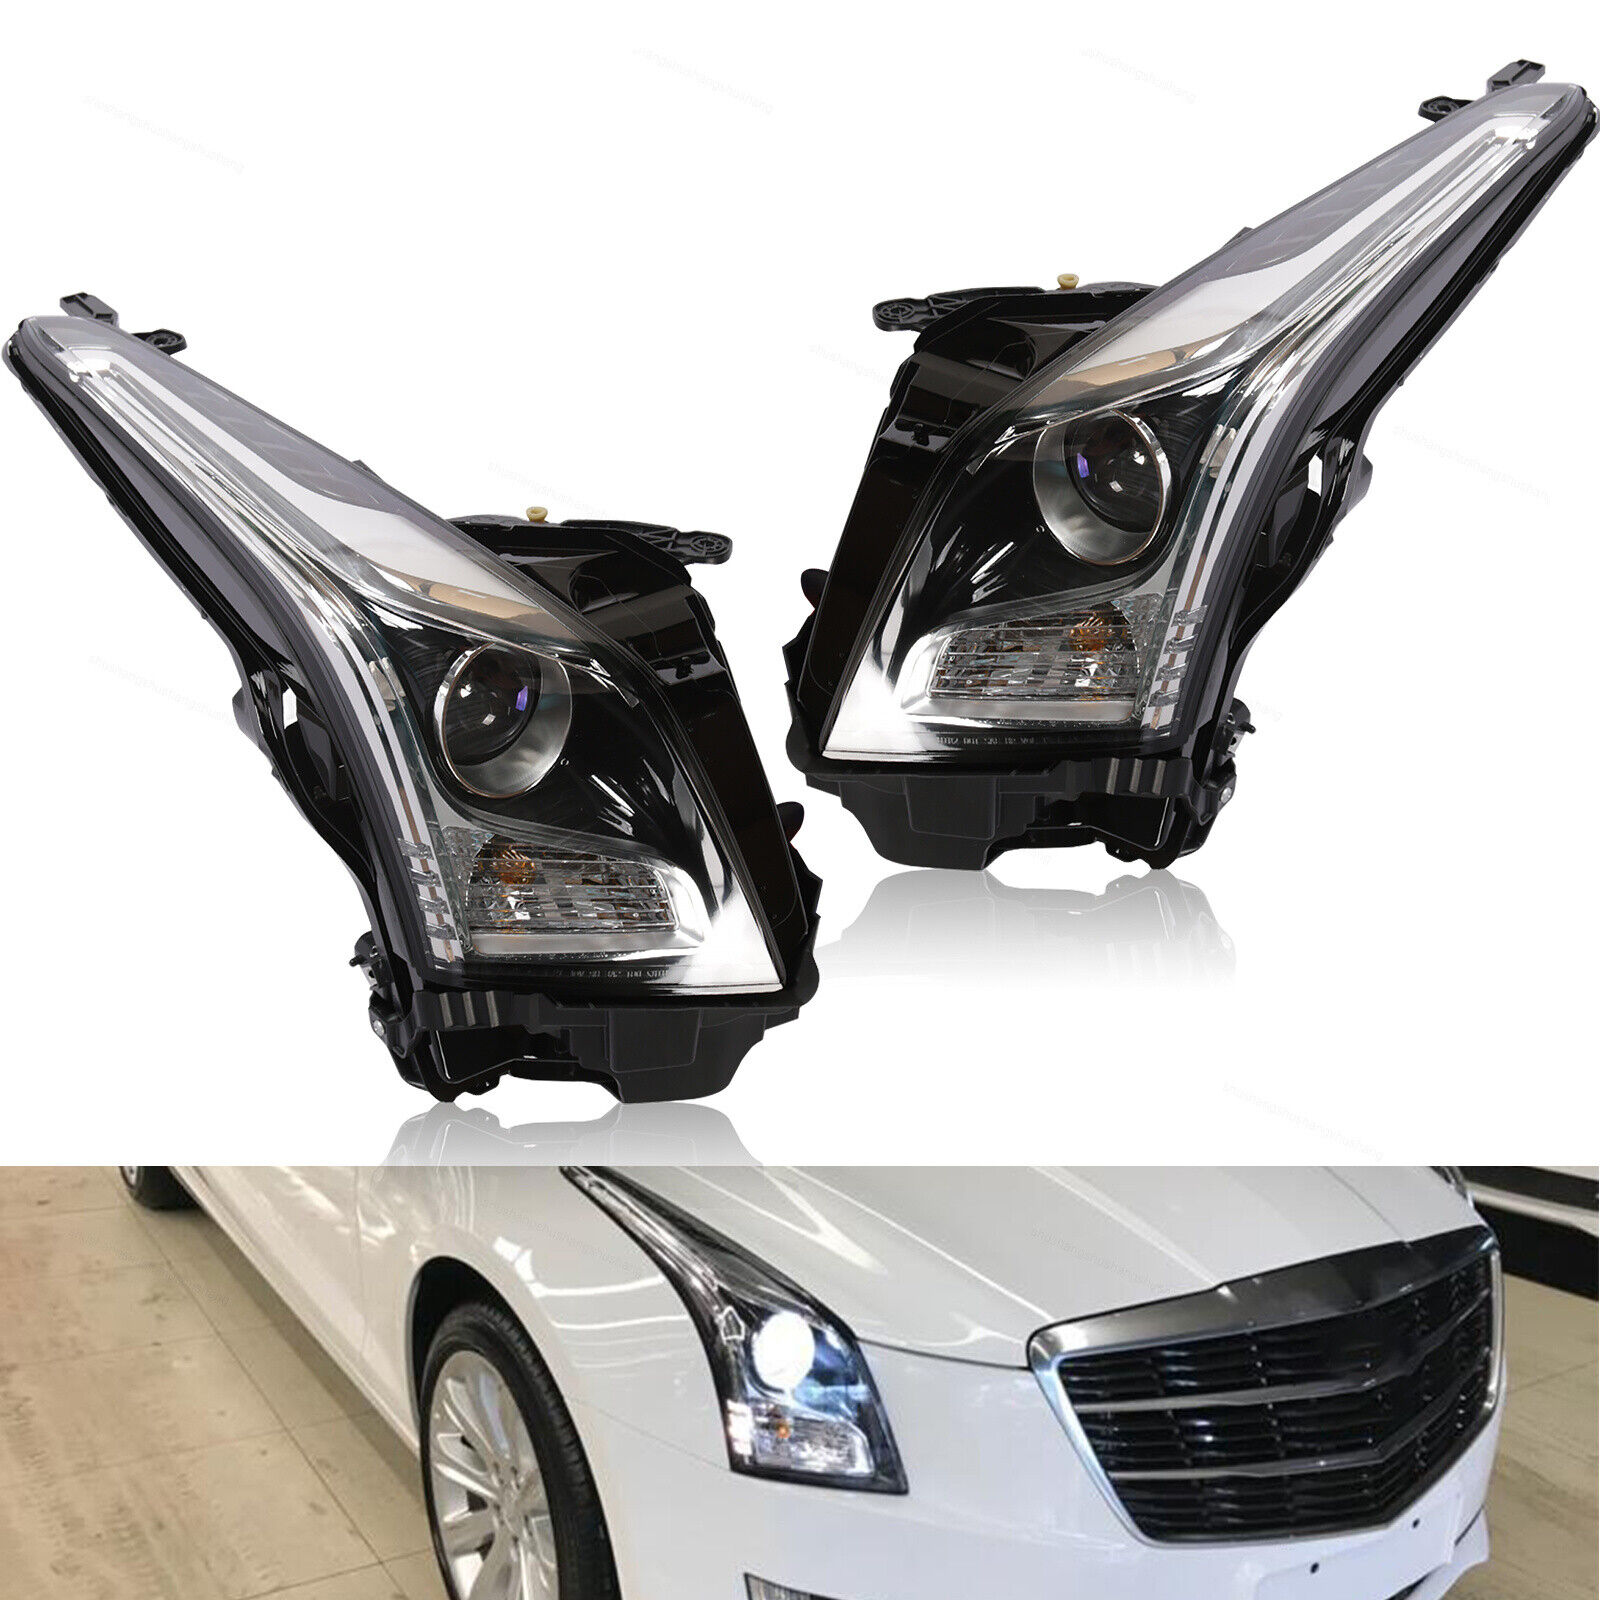 New Headlights Factory Style Halogen Headlights Fit for 2013-2018 Cadillac ATS